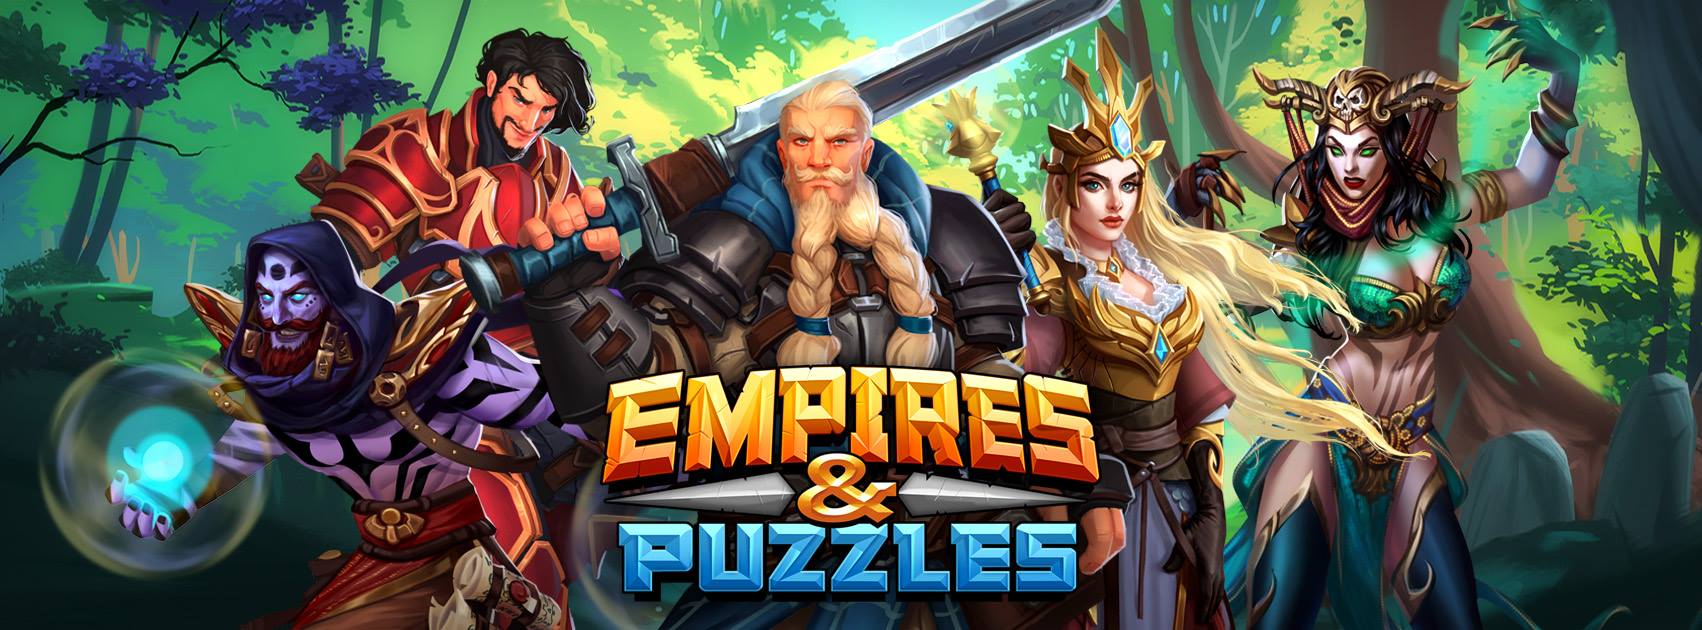 hero academy empires and puzzles list